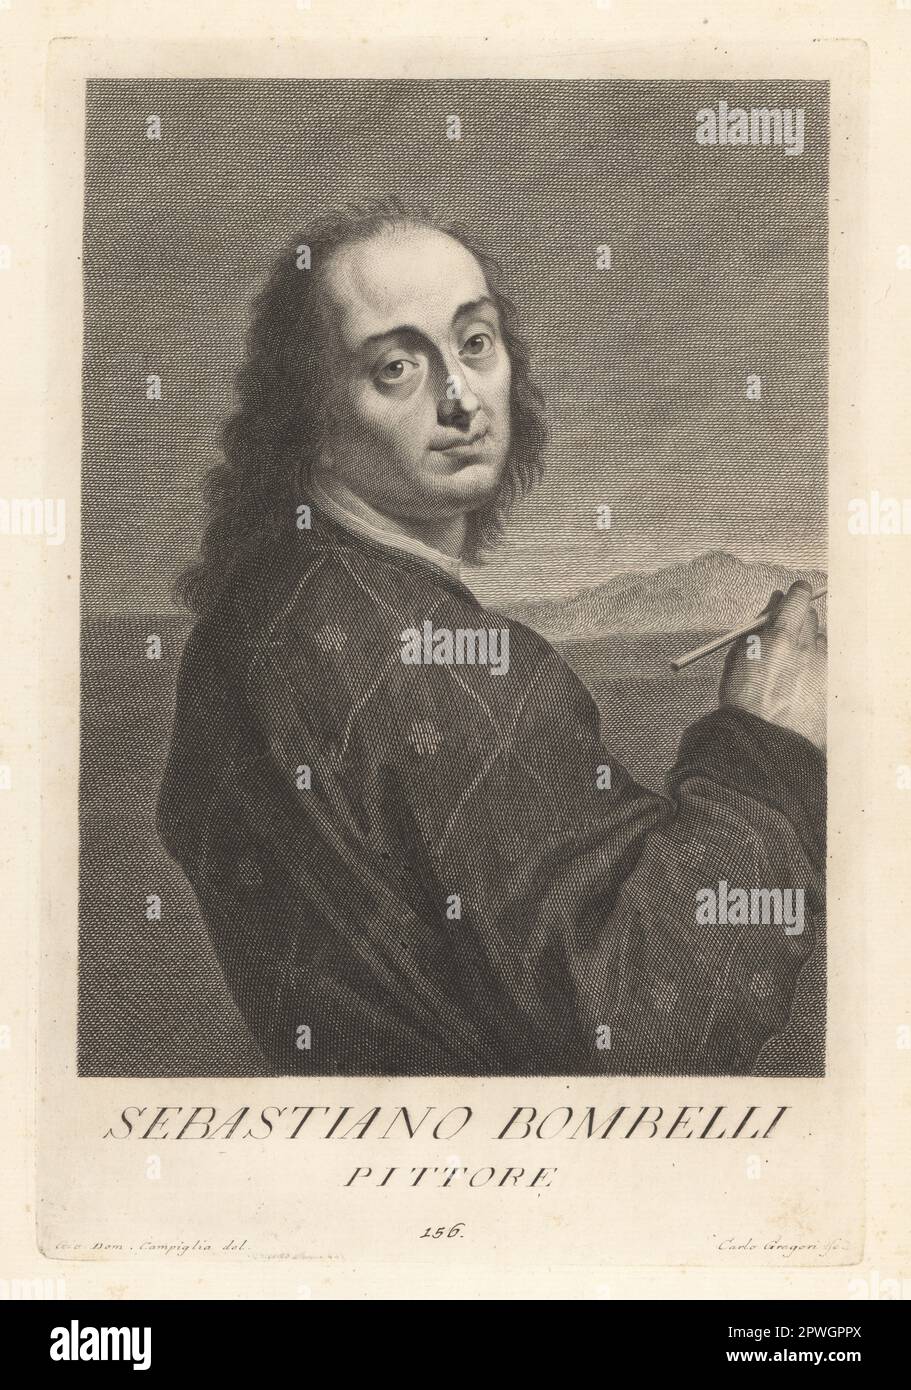 Sebastiano Bombelli, Italian painter, mainly active in Venice, during the Baroque period, 1635-1719. Born in Udine, painted history paintings and later portraits for German royalty. Copperplate engraving by Carlo Gregori after Giovanni Domenico Campiglia after a self portrait by the artist from Francesco Moucke's Museo Florentino (Museum Florentinum), Serie di Ritratti de Pittori (Series of Portraits of Painters) stamperia Mouckiana, Florence, 1752-62. Stock Photo